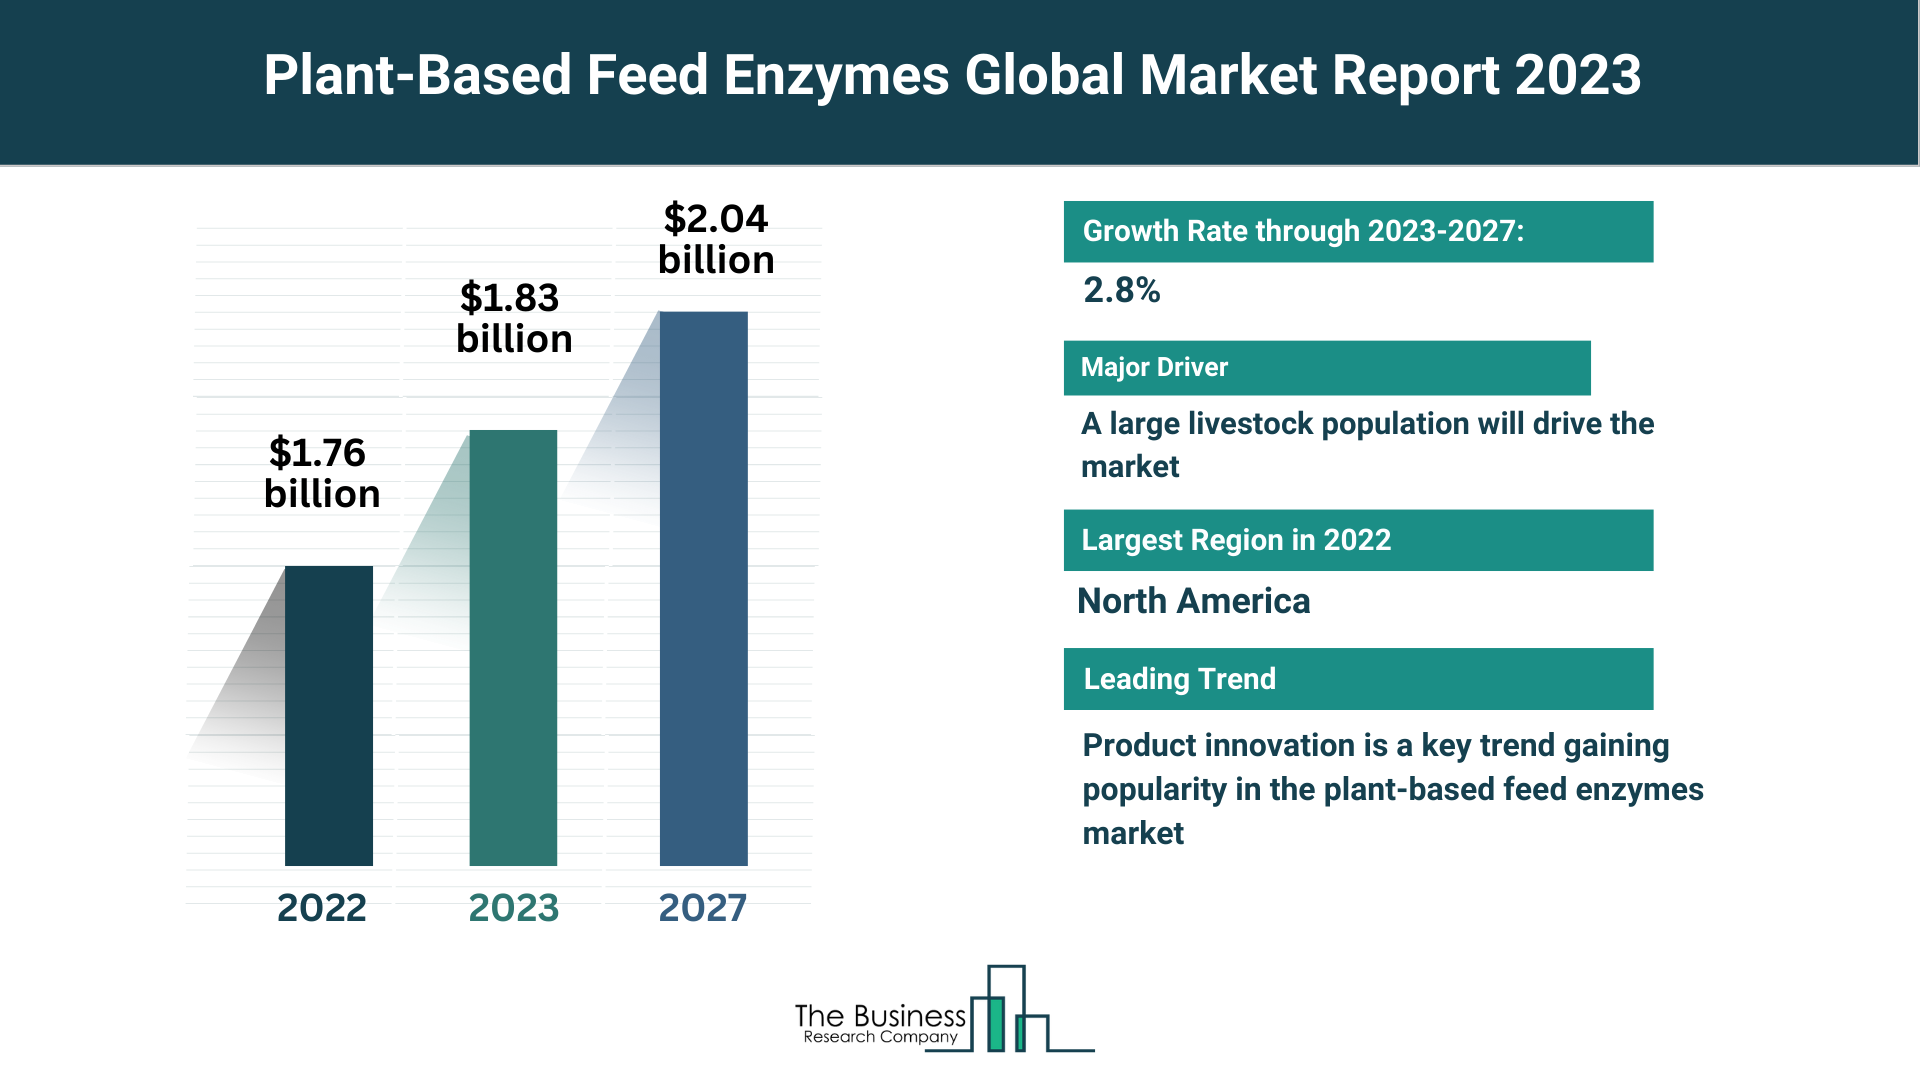 Global Plant-Based Feed Enzymes Market